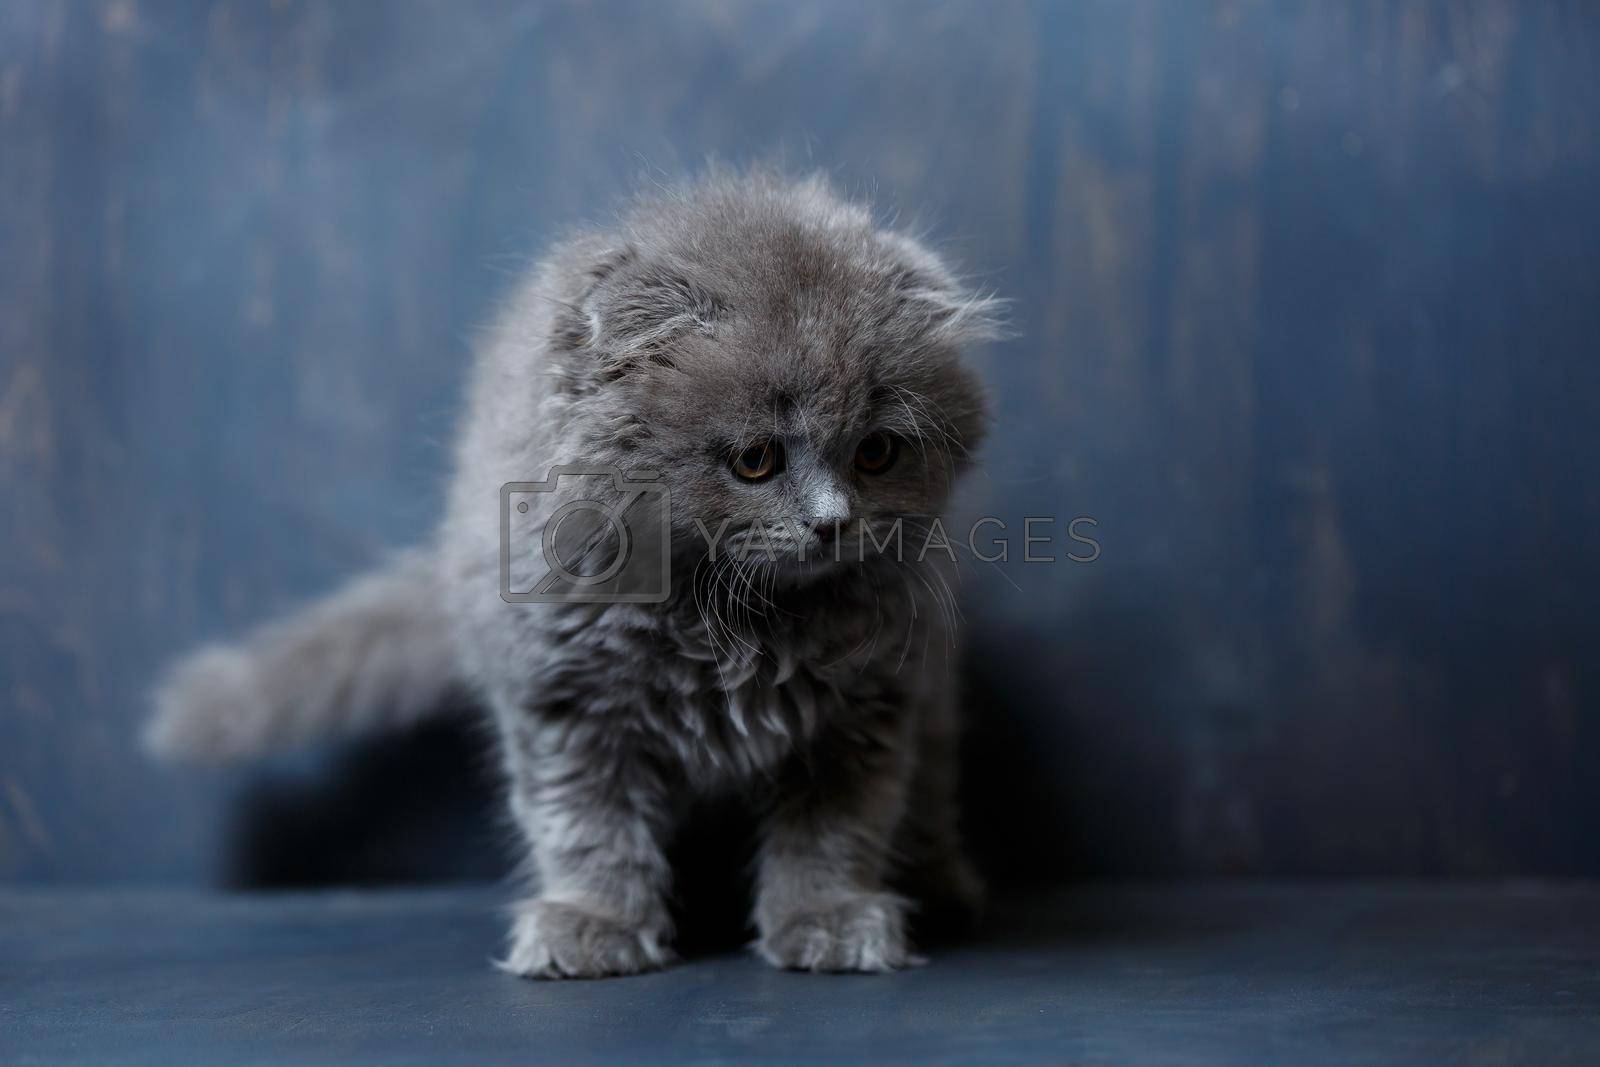 Royalty free image of Gray little cat of breed Scottish fold plays on a gray background by Dmitrytph